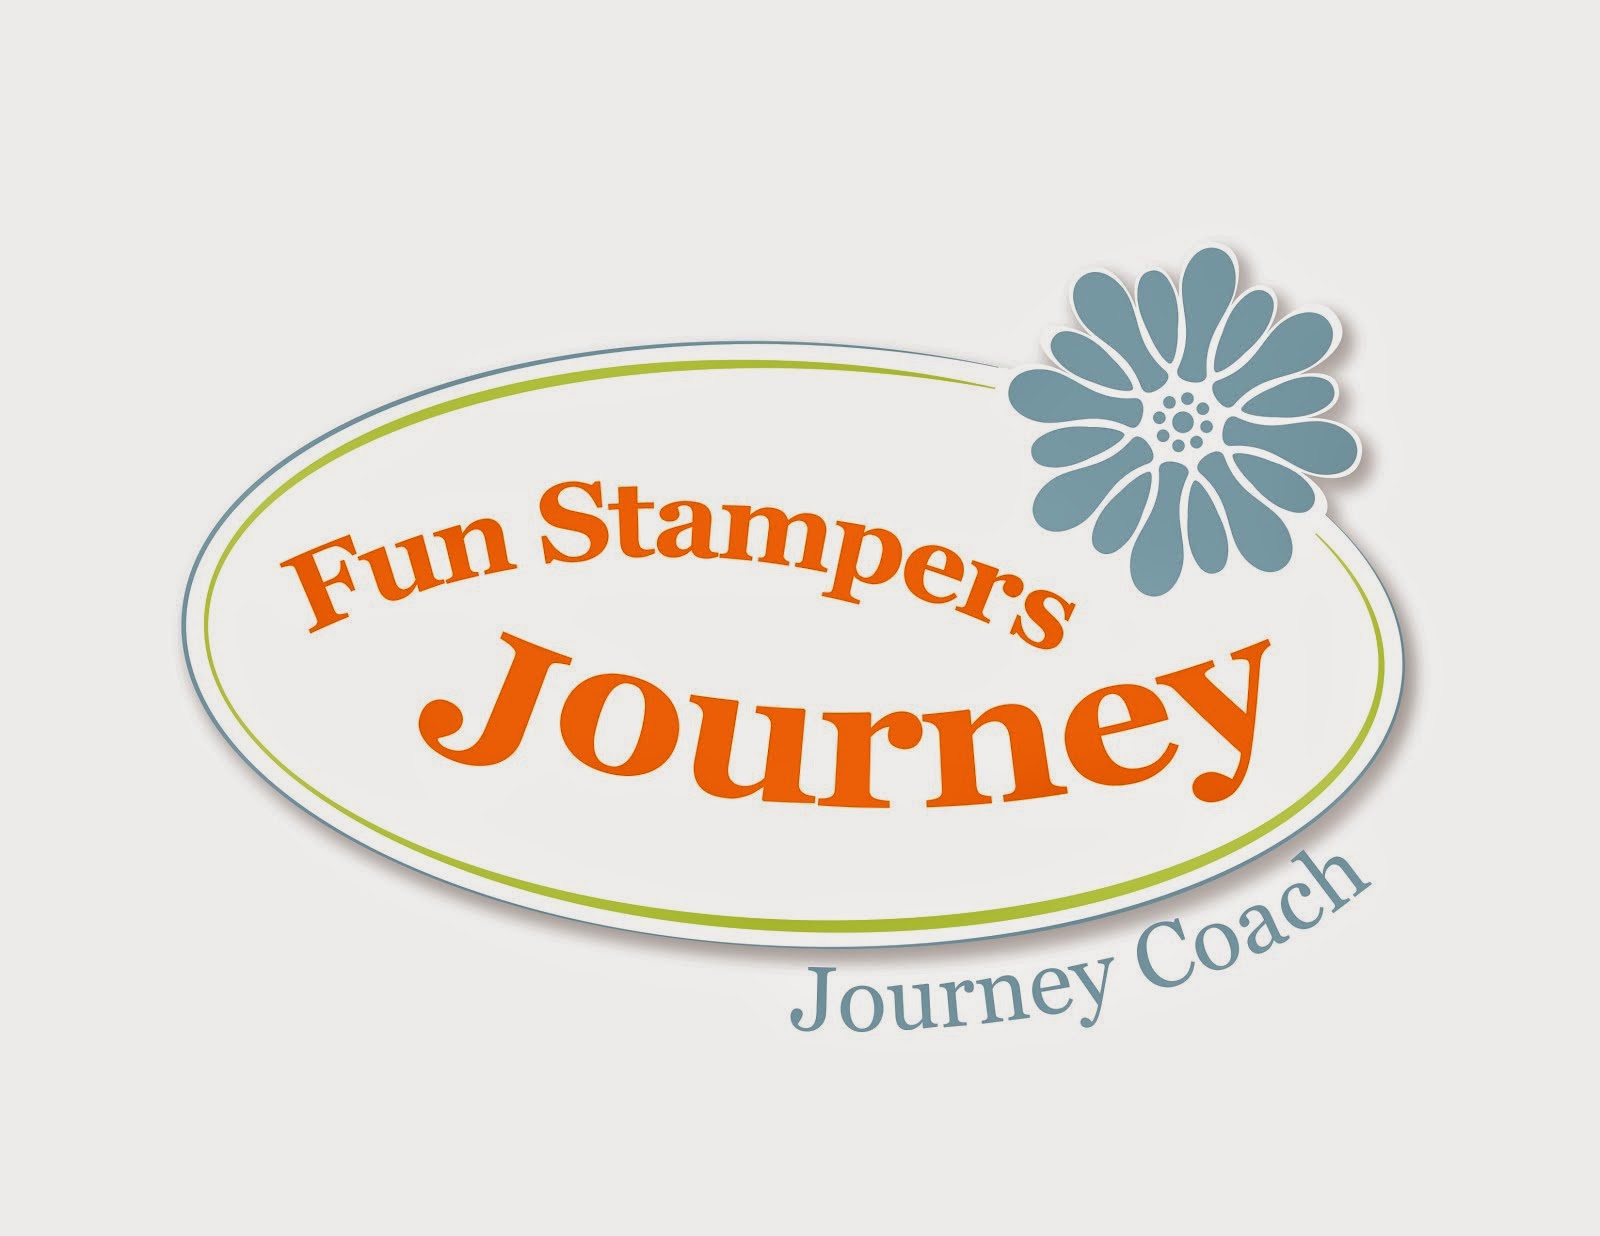 Fun Stampers Journey